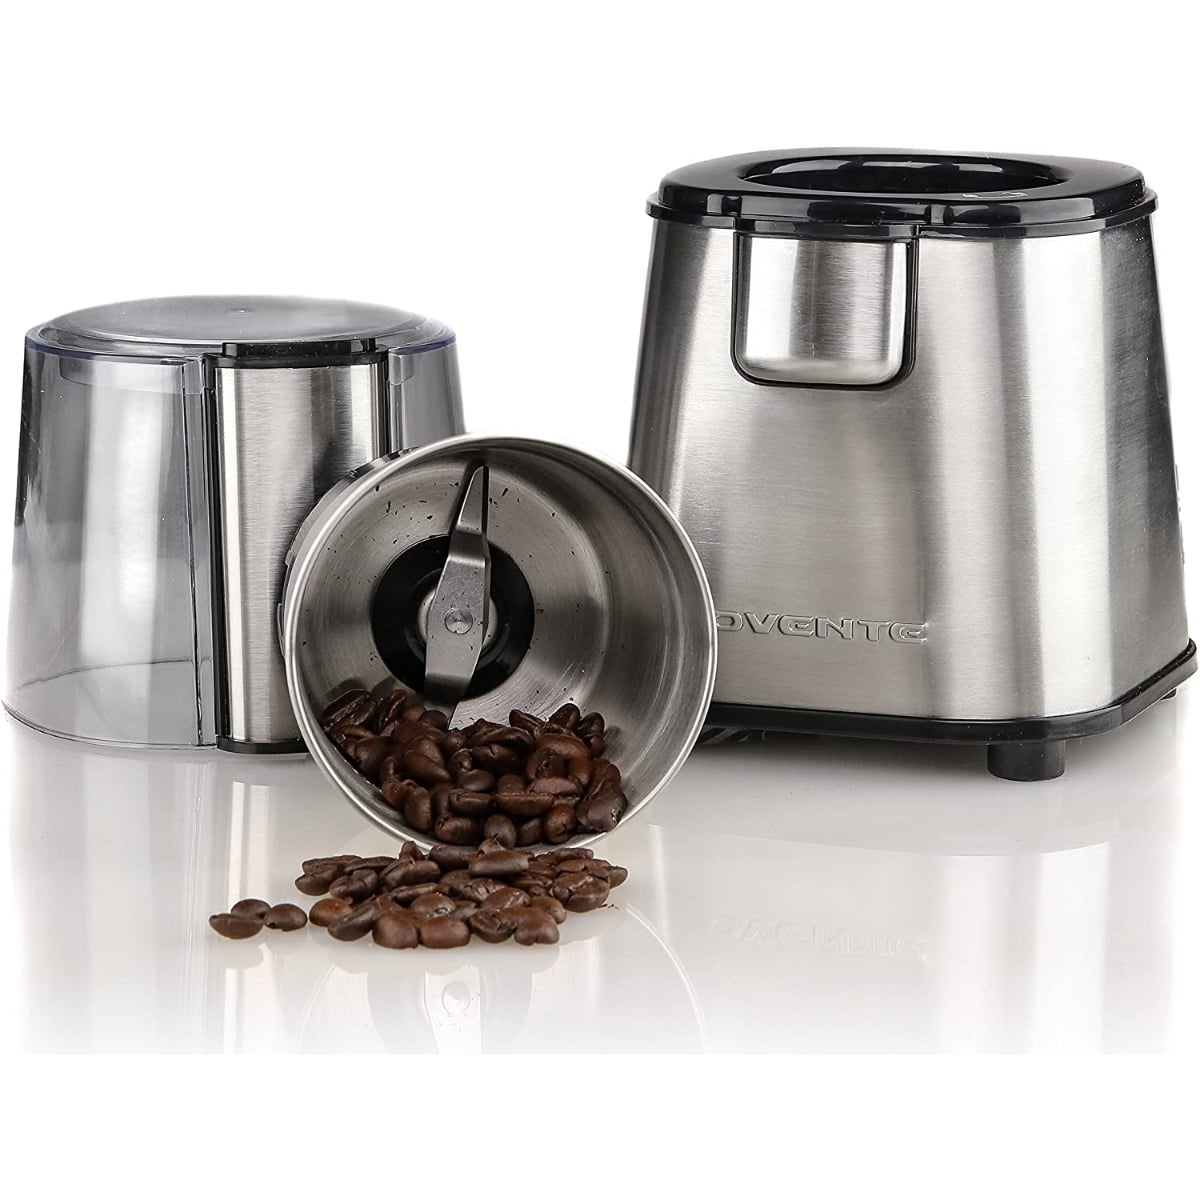 Ovente 2.1 oz. Silver Multi-Purpose Electric Coffee Grinder Lid-Activated Switch